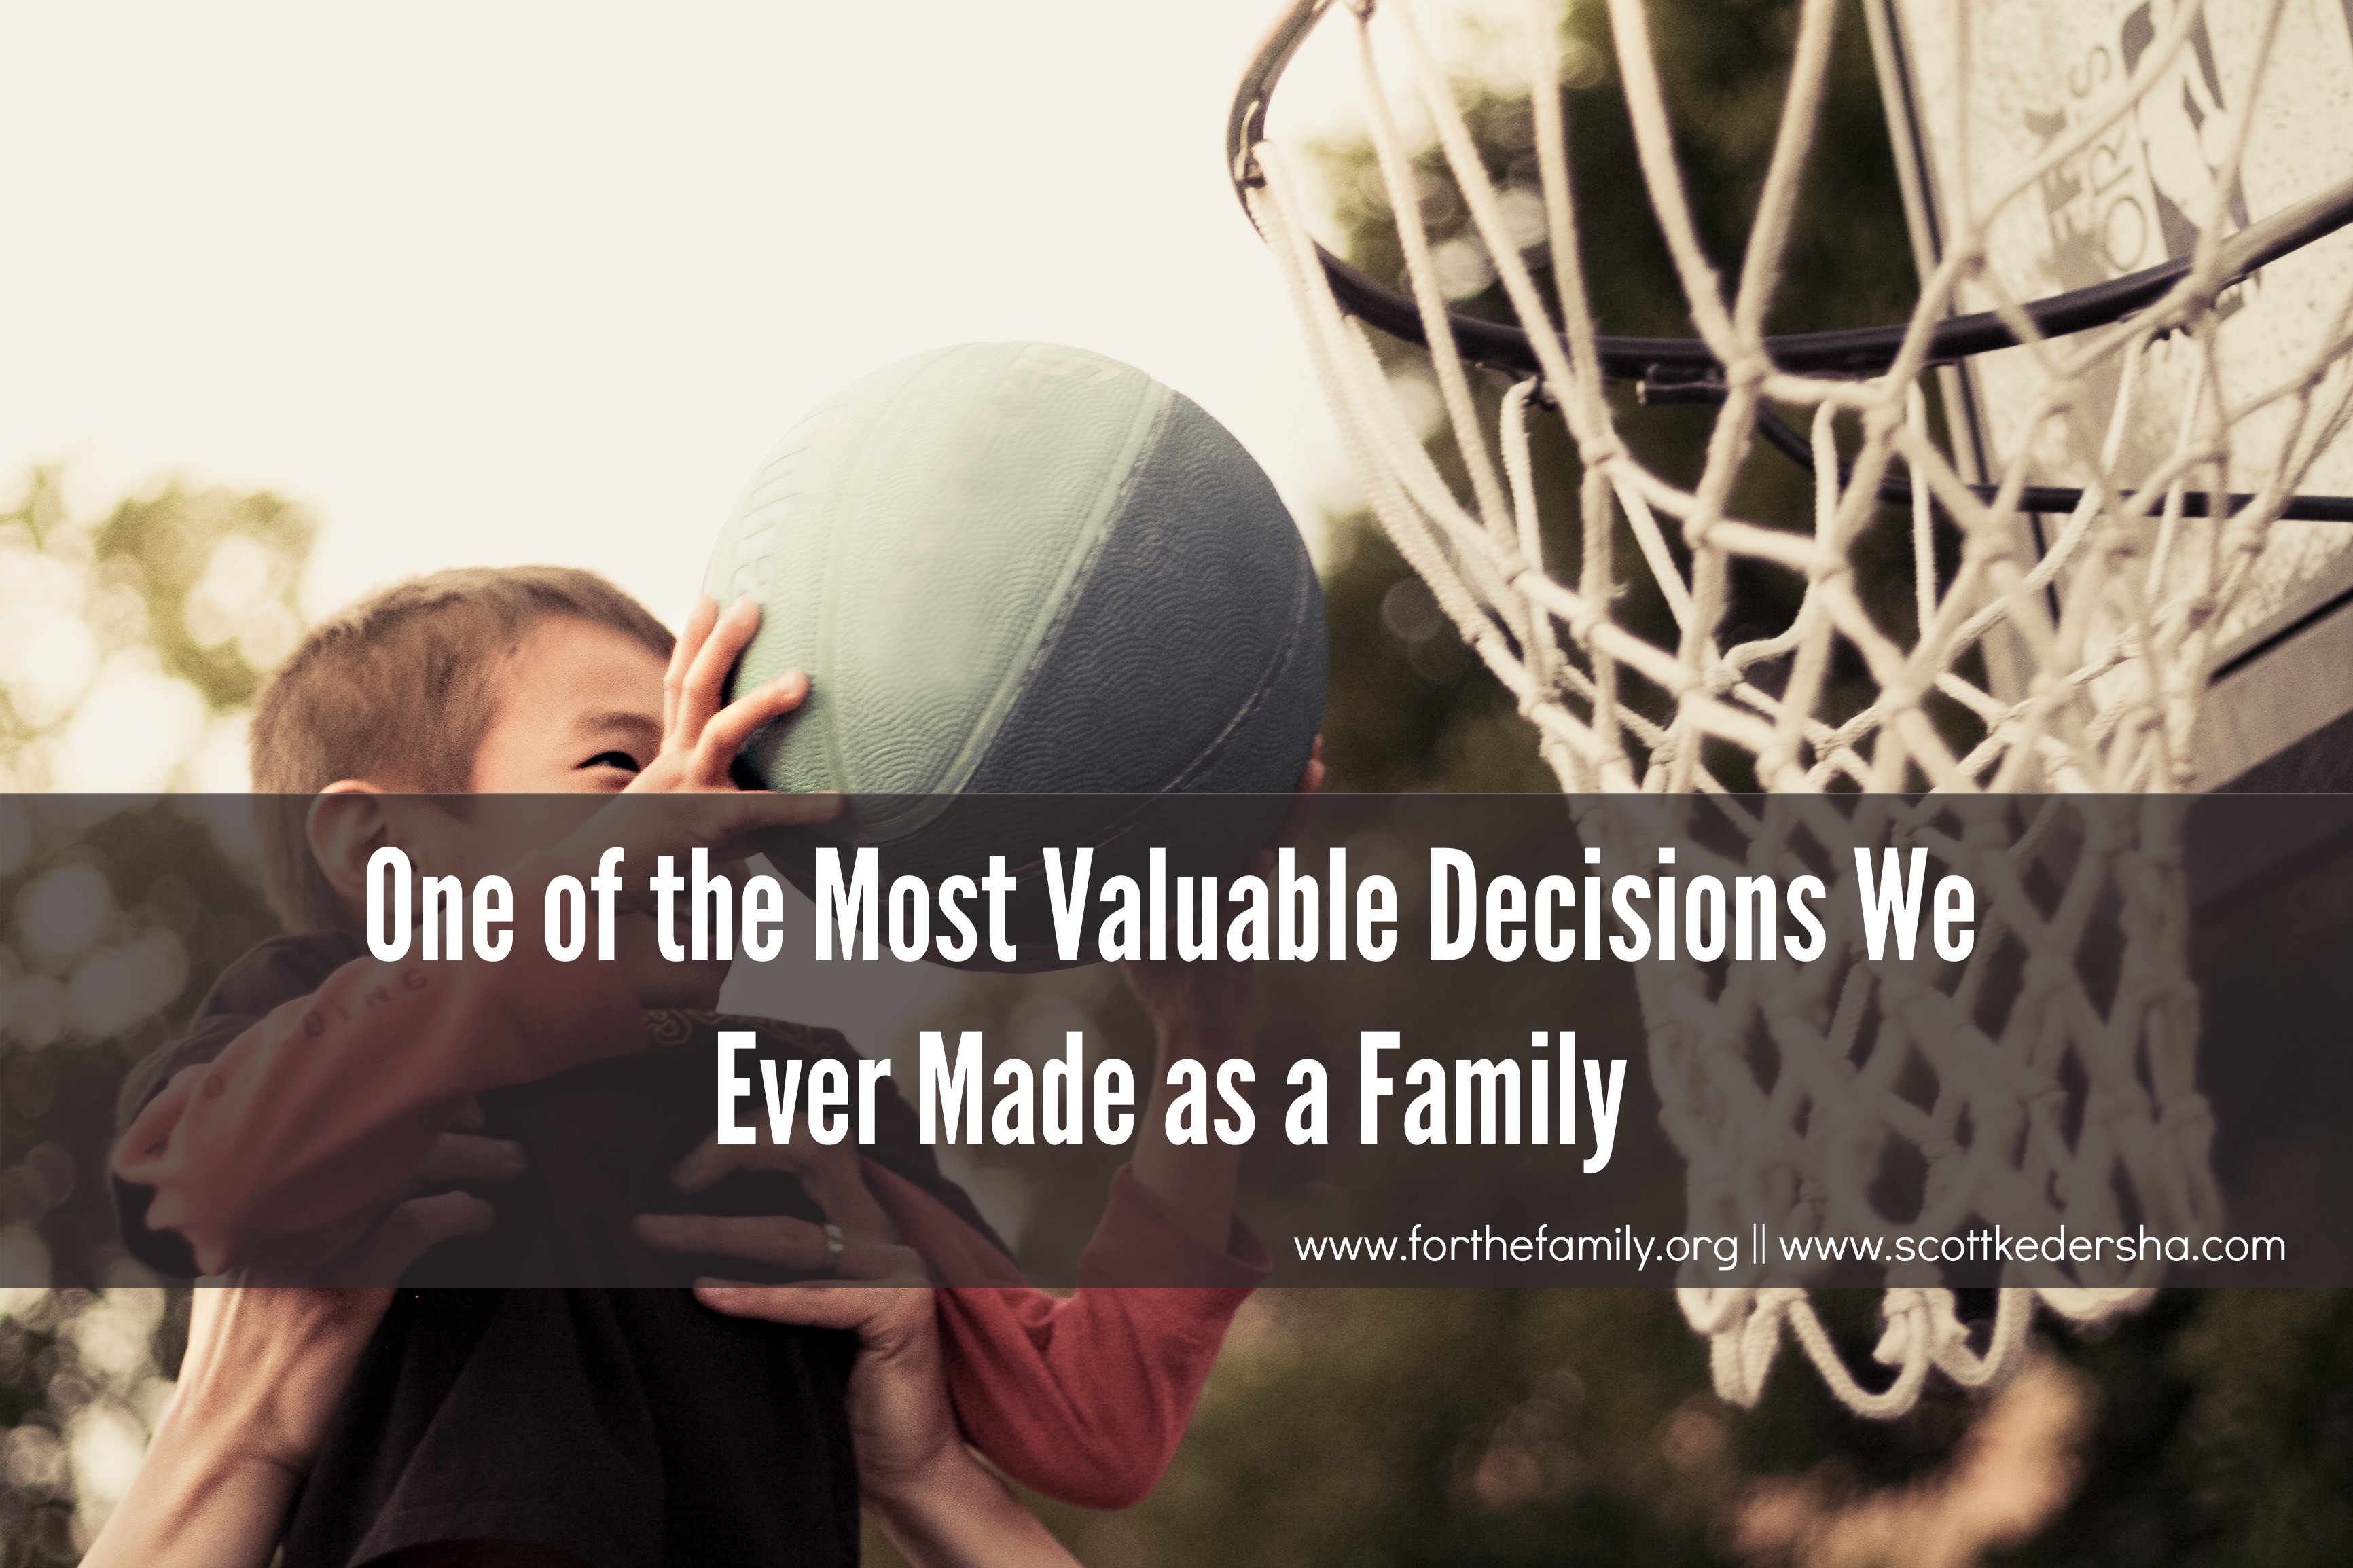 One of the Most Valuable Decisions We Ever Made as a Family